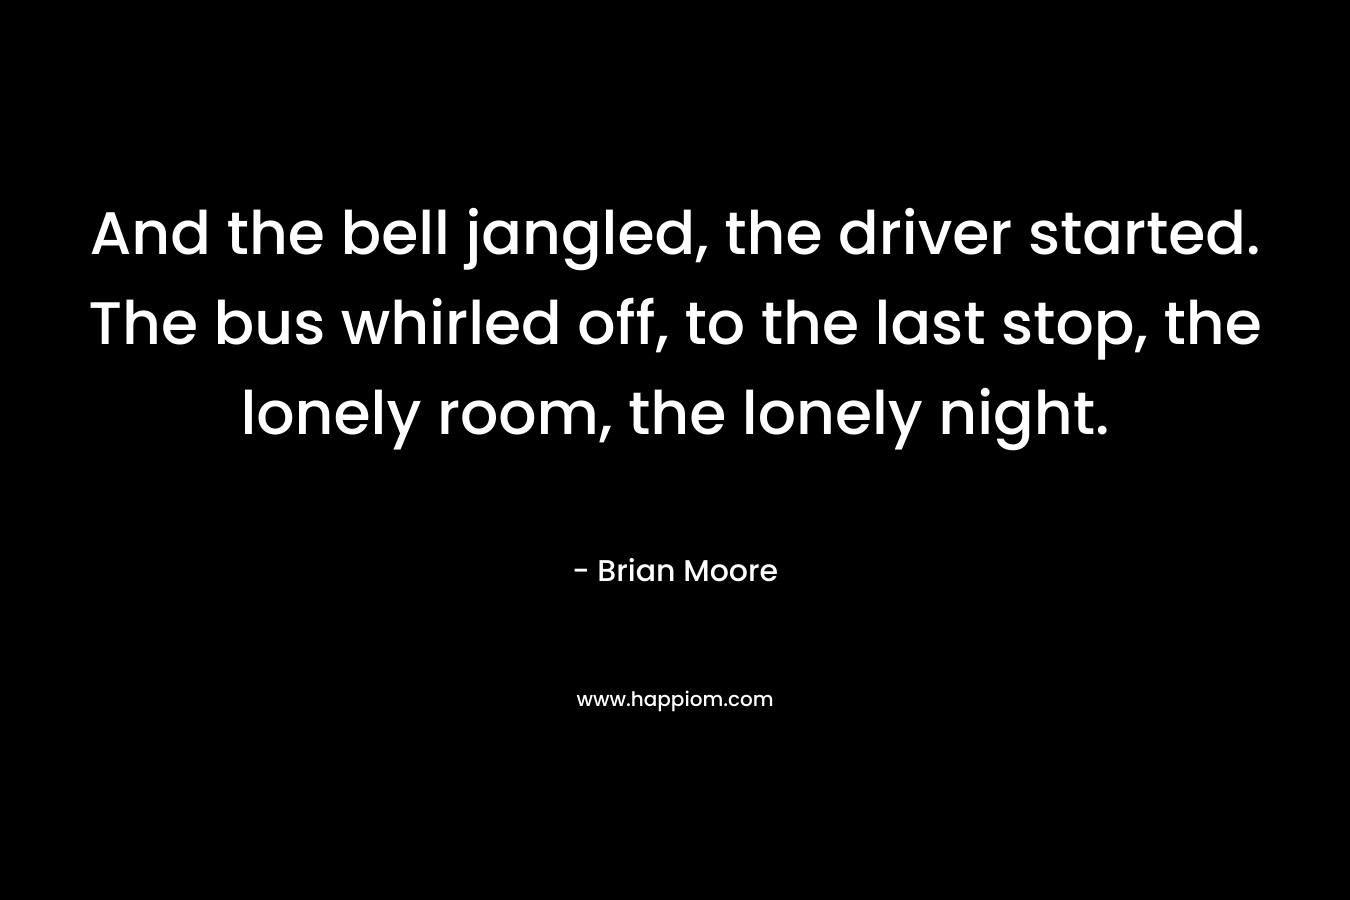 And the bell jangled, the driver started. The bus whirled off, to the last stop, the lonely room, the lonely night.